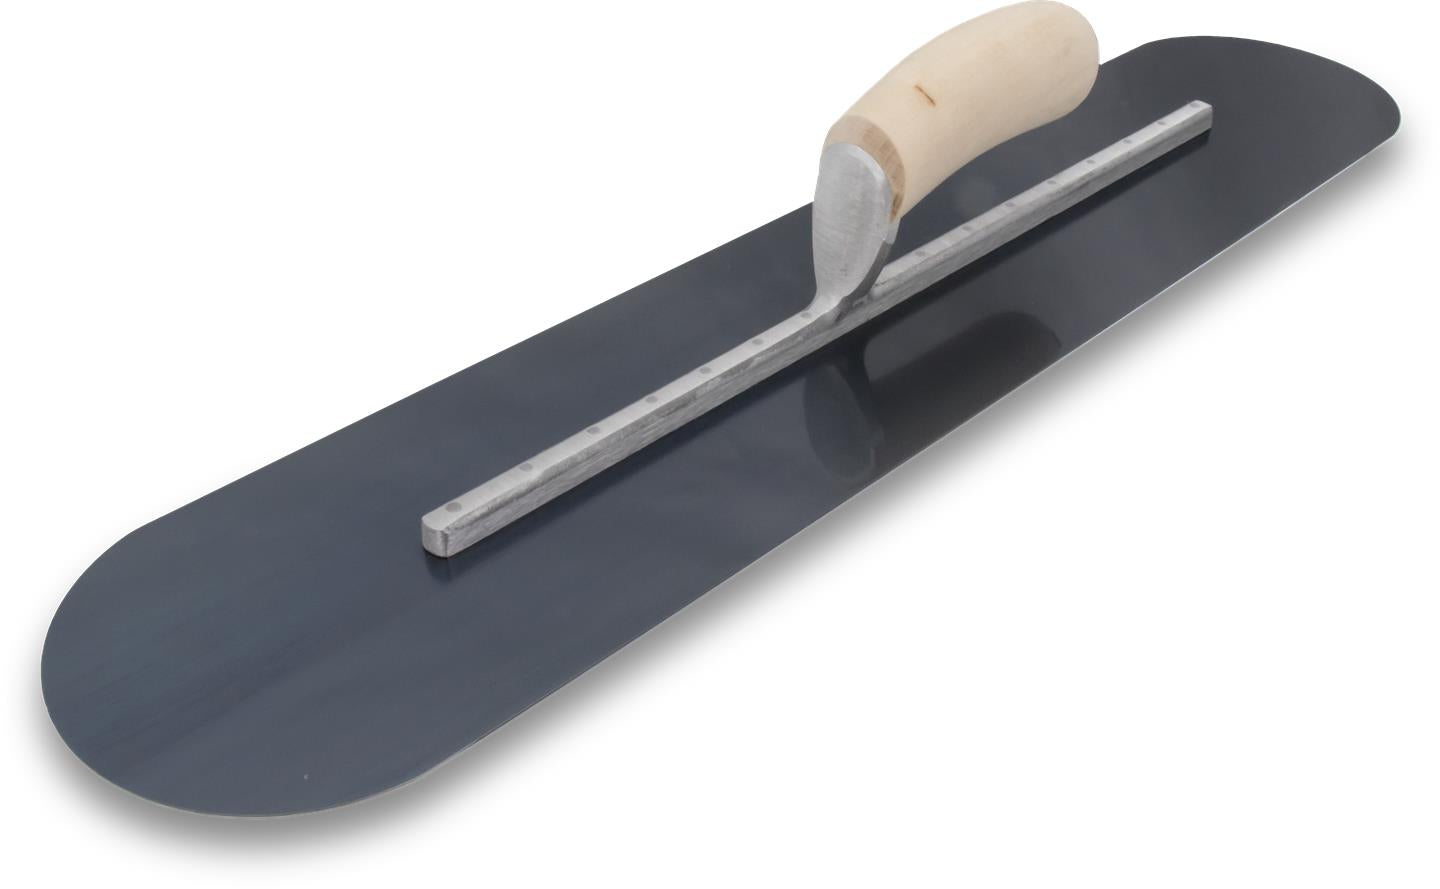 Marshalltown 13536 20 X 4 Blue Steel Finishing Trowel-Fully Rounded Curved Wood Handle